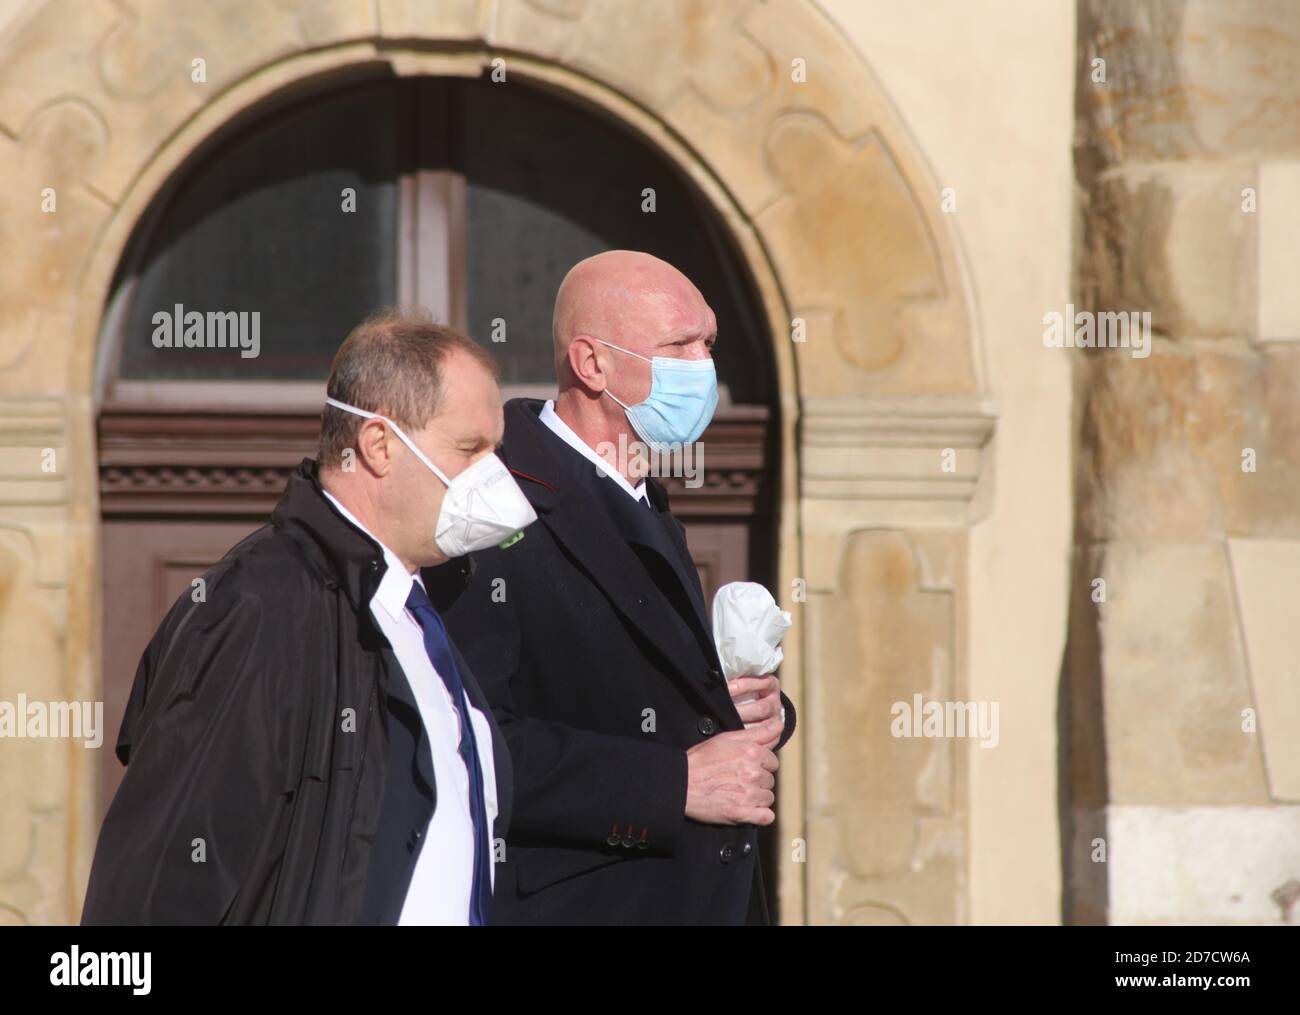 Cracow. Krakow. Poland. Second wave of coronavirus pandemic. Restrictions are back. Two men wearing masks. Stock Photo